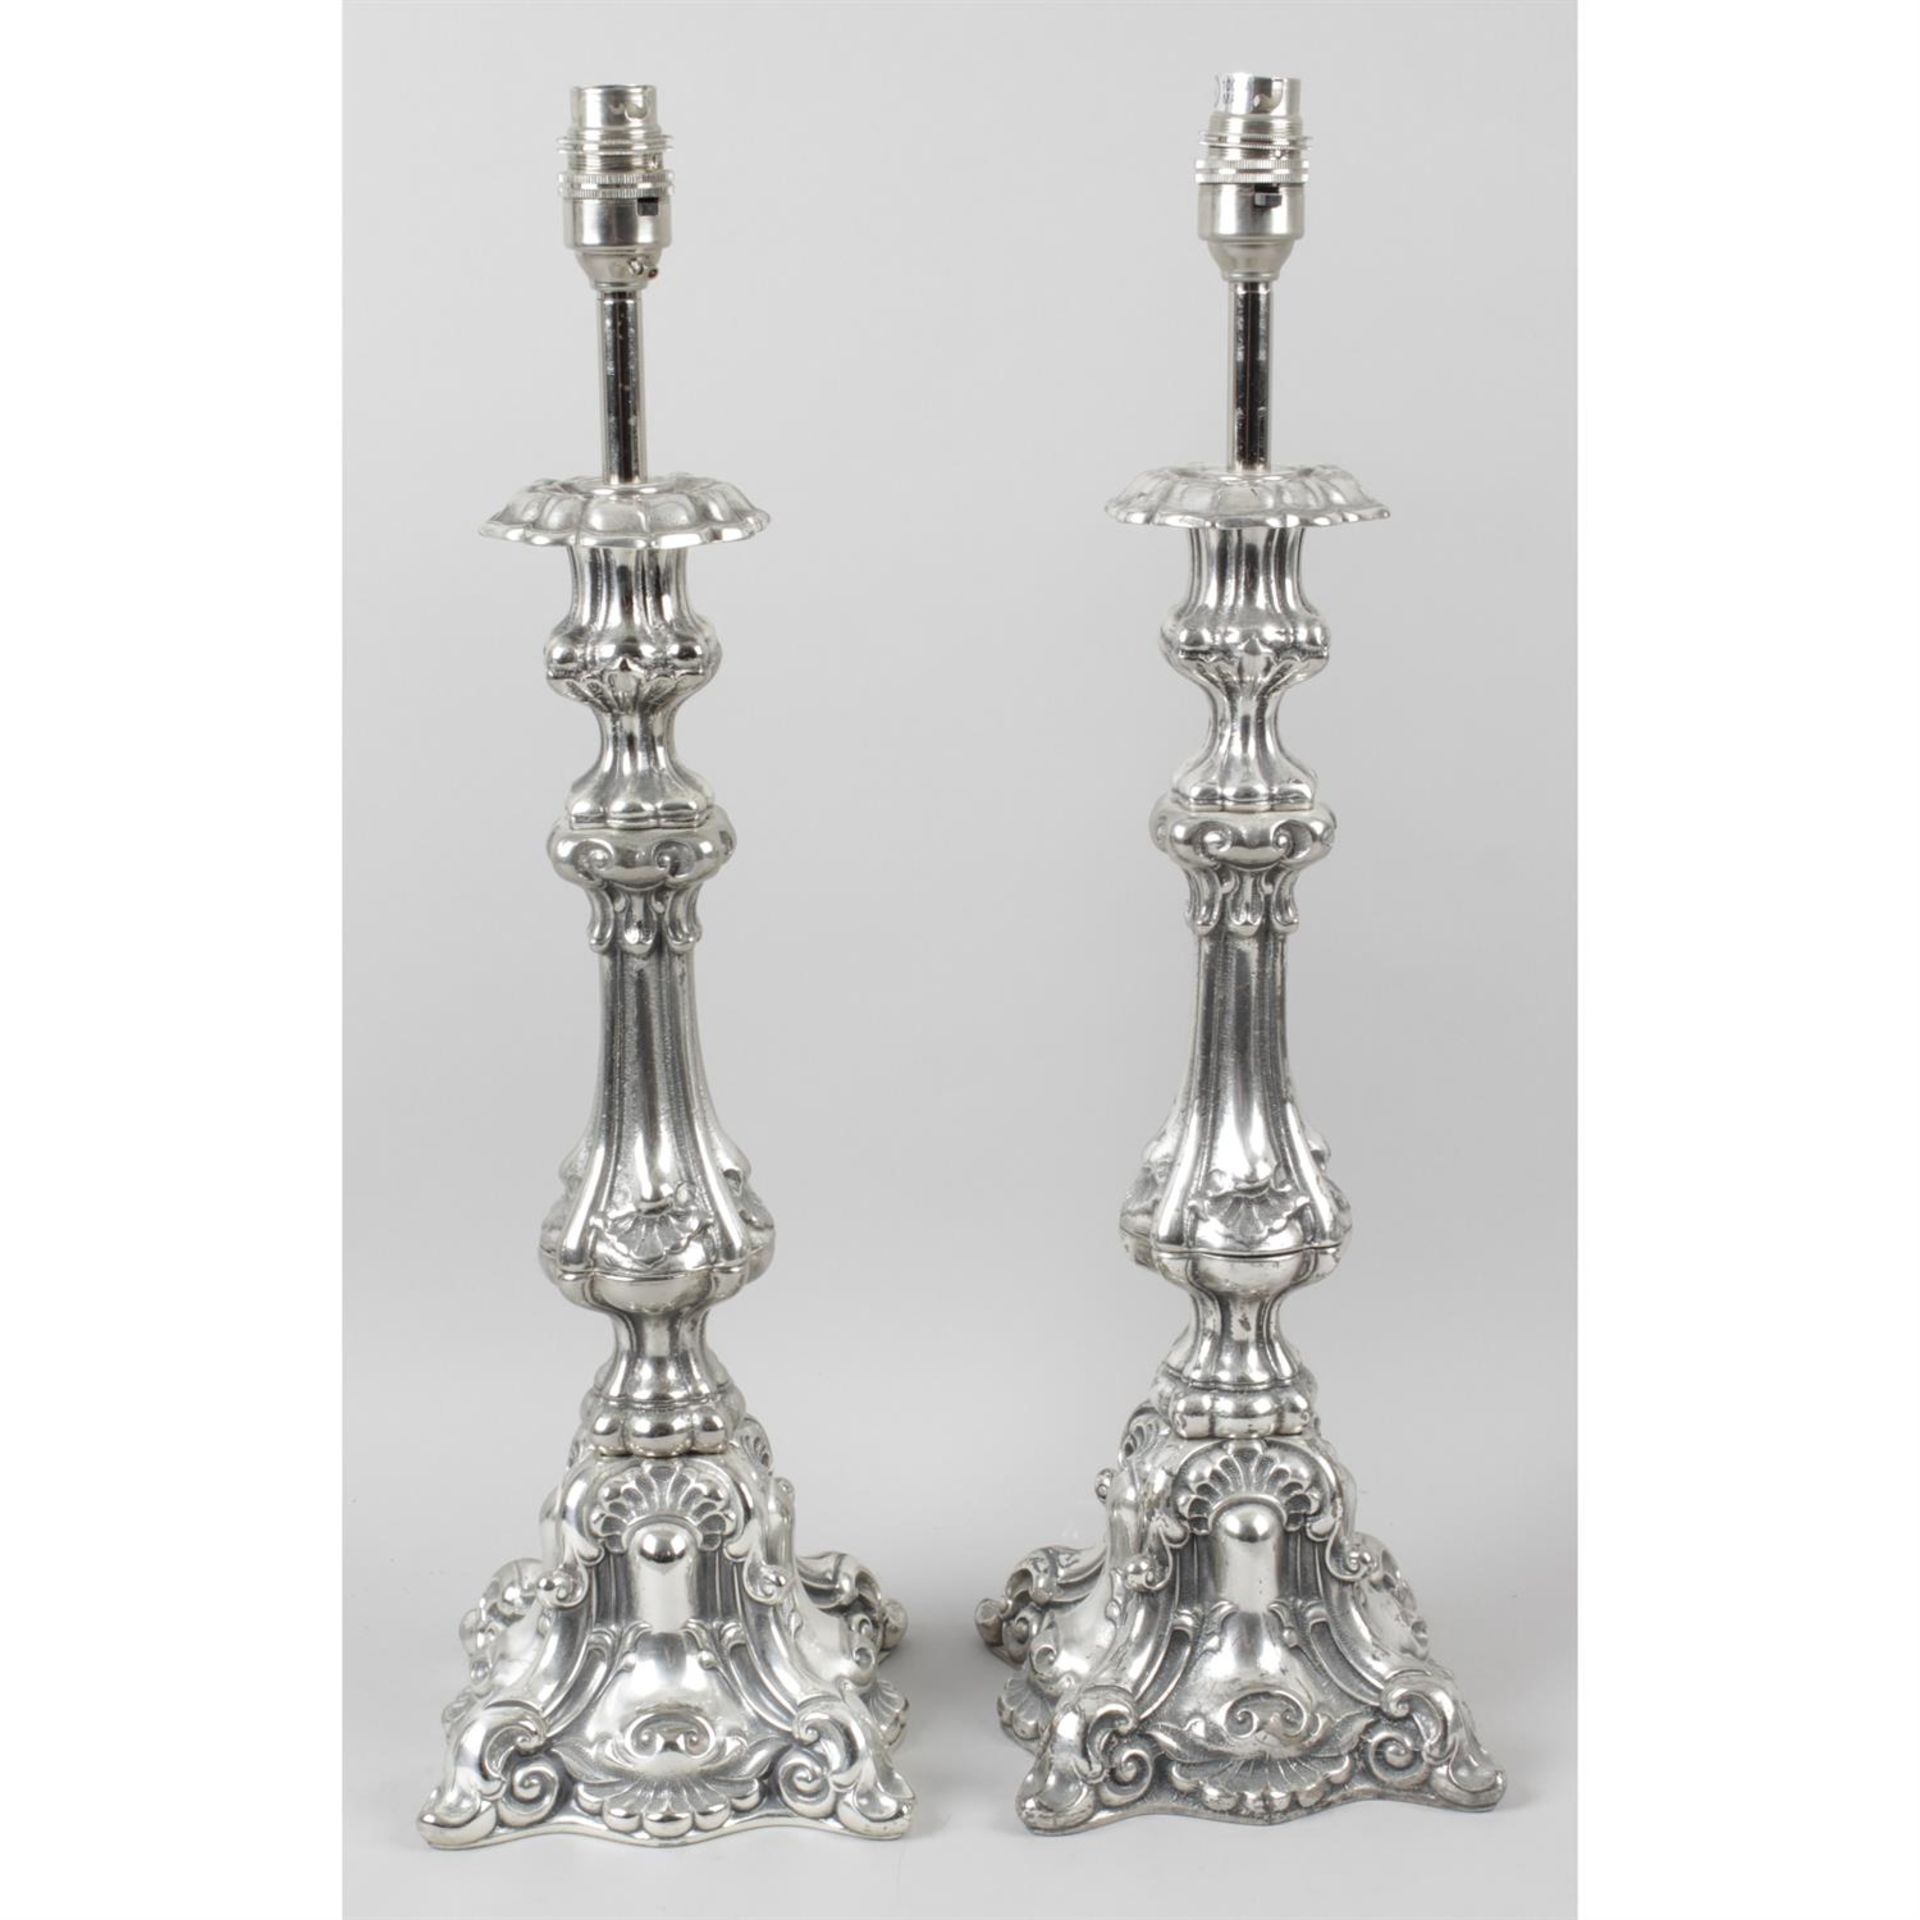 A pair of reproduction cast metal lamp bases.